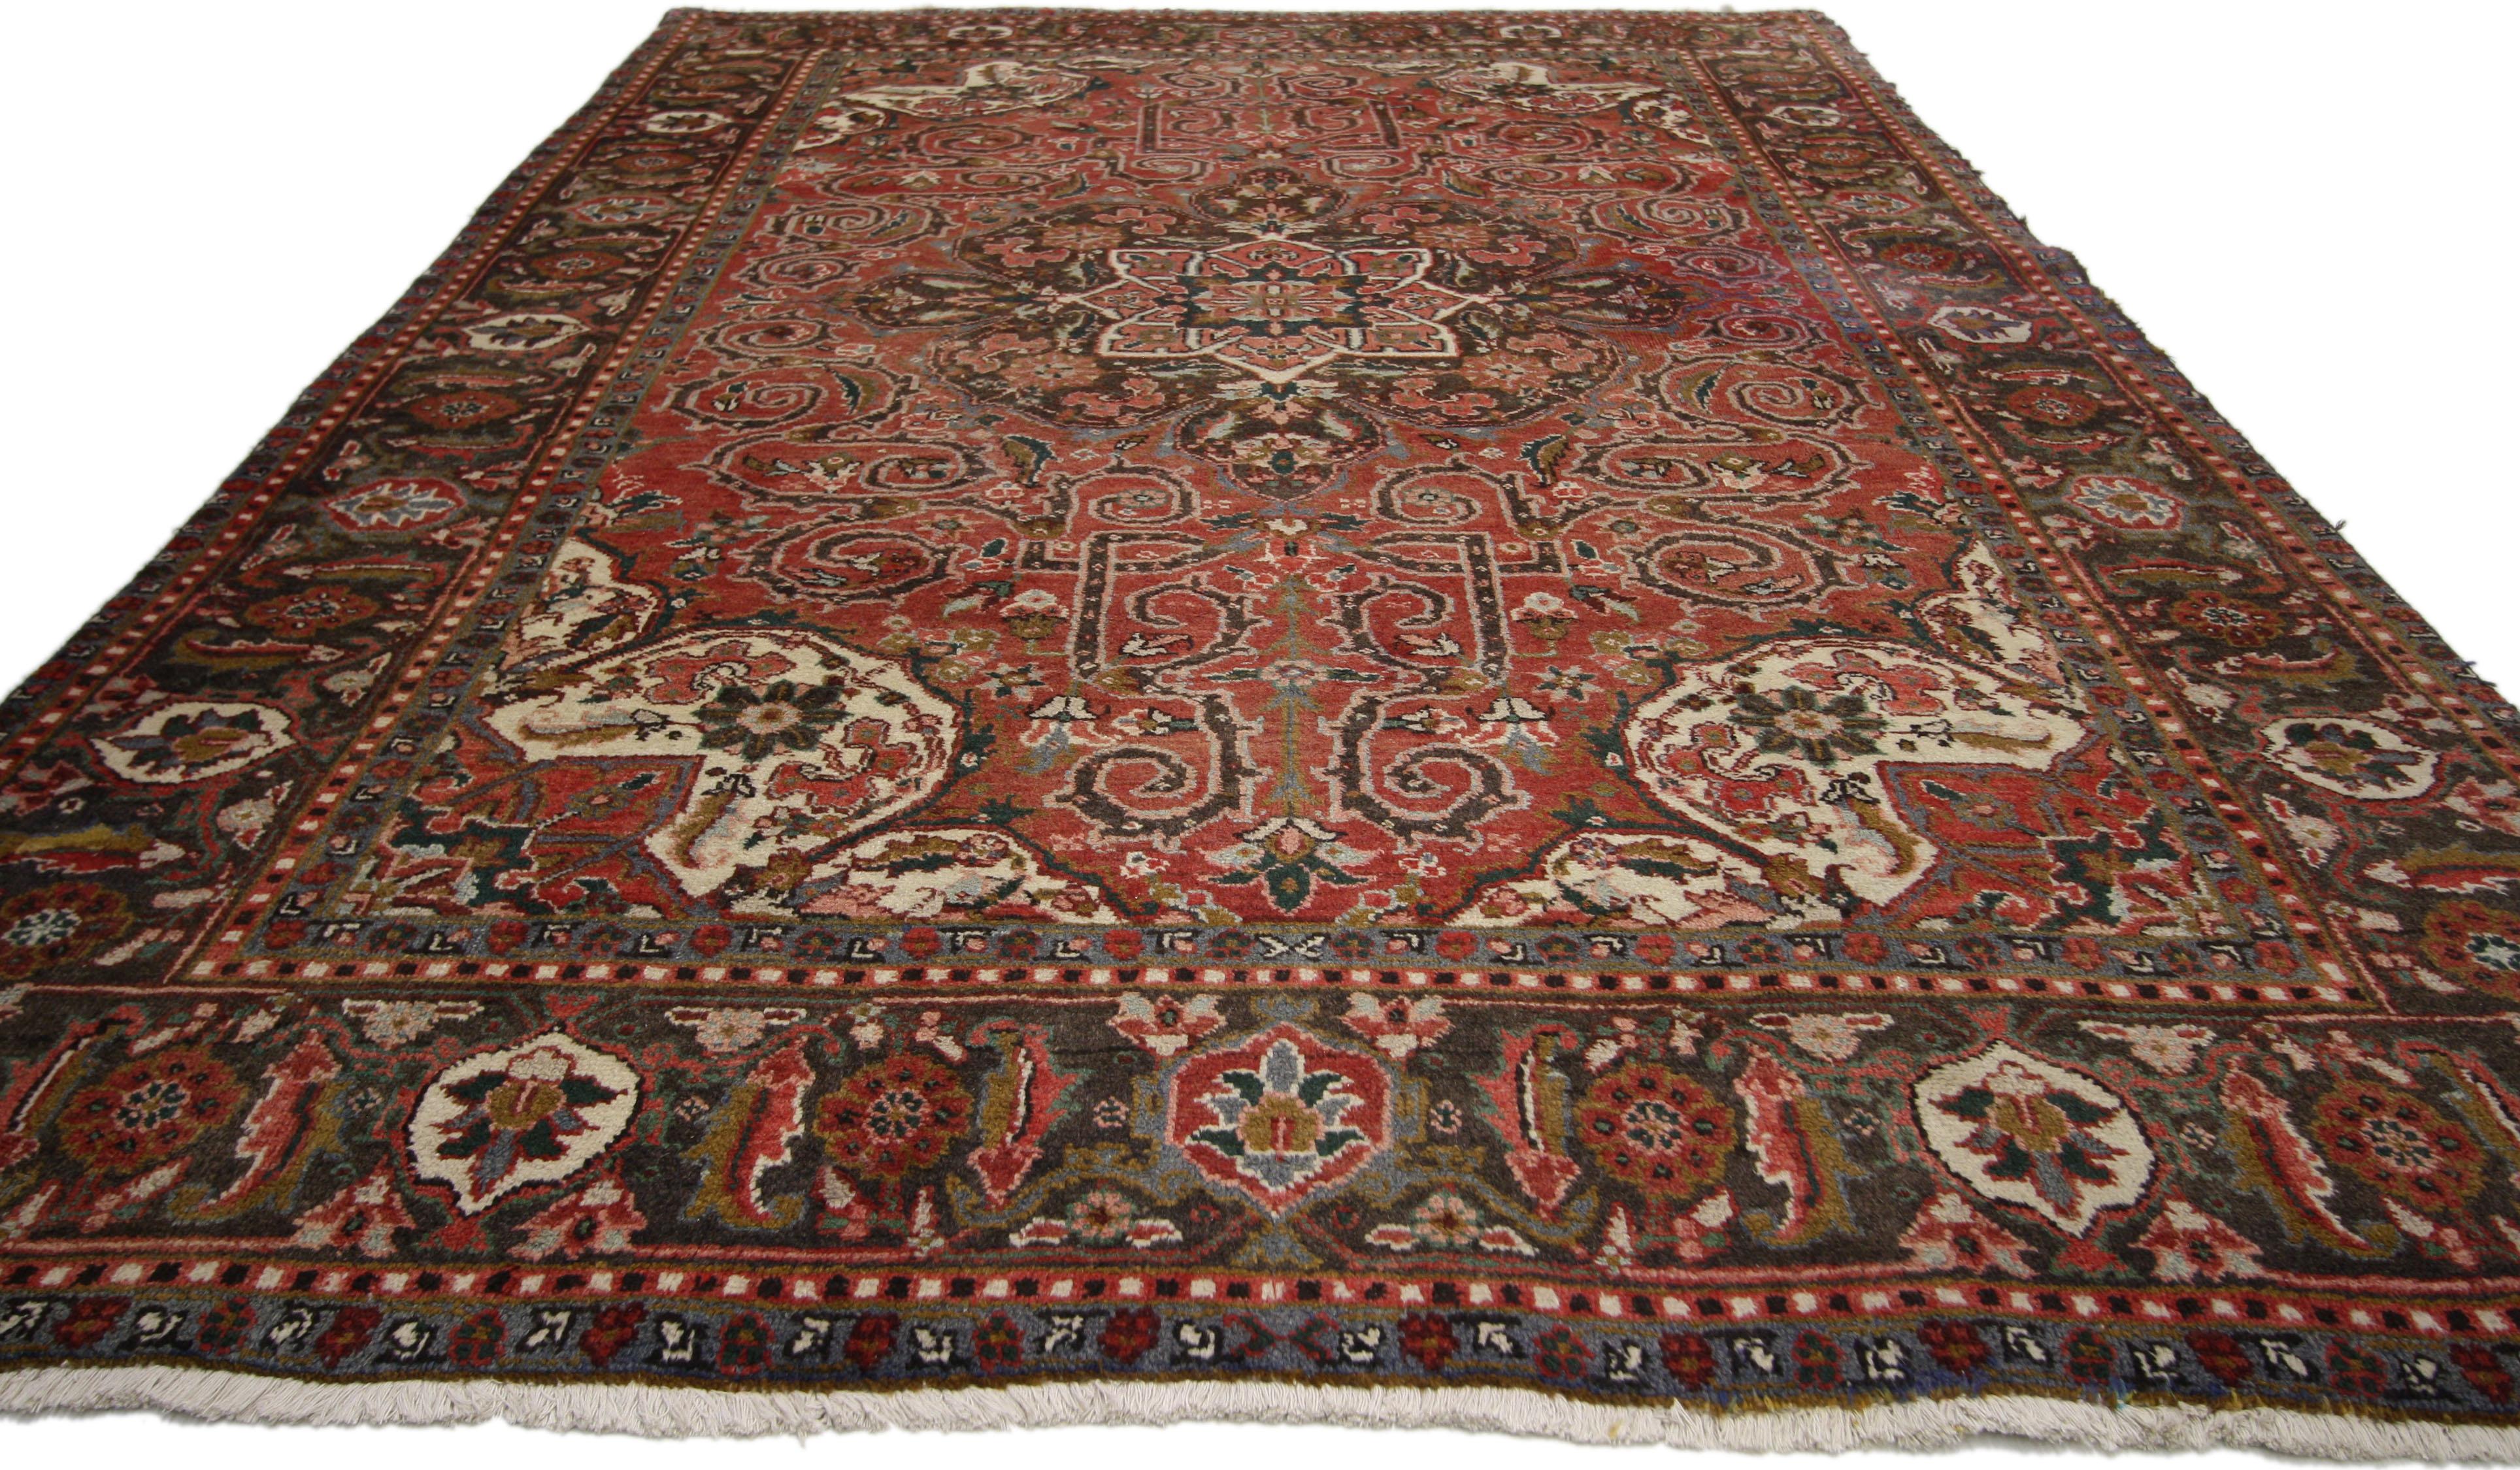 76226 vintage Persian Heriz rug with Mid-Century Modern English Tudor Cottage style. Traditional and regal with warm colors, this vintage Persian Heriz area rug with Modern English Cottage Tudor style is comprised of a prominent octagram medallion